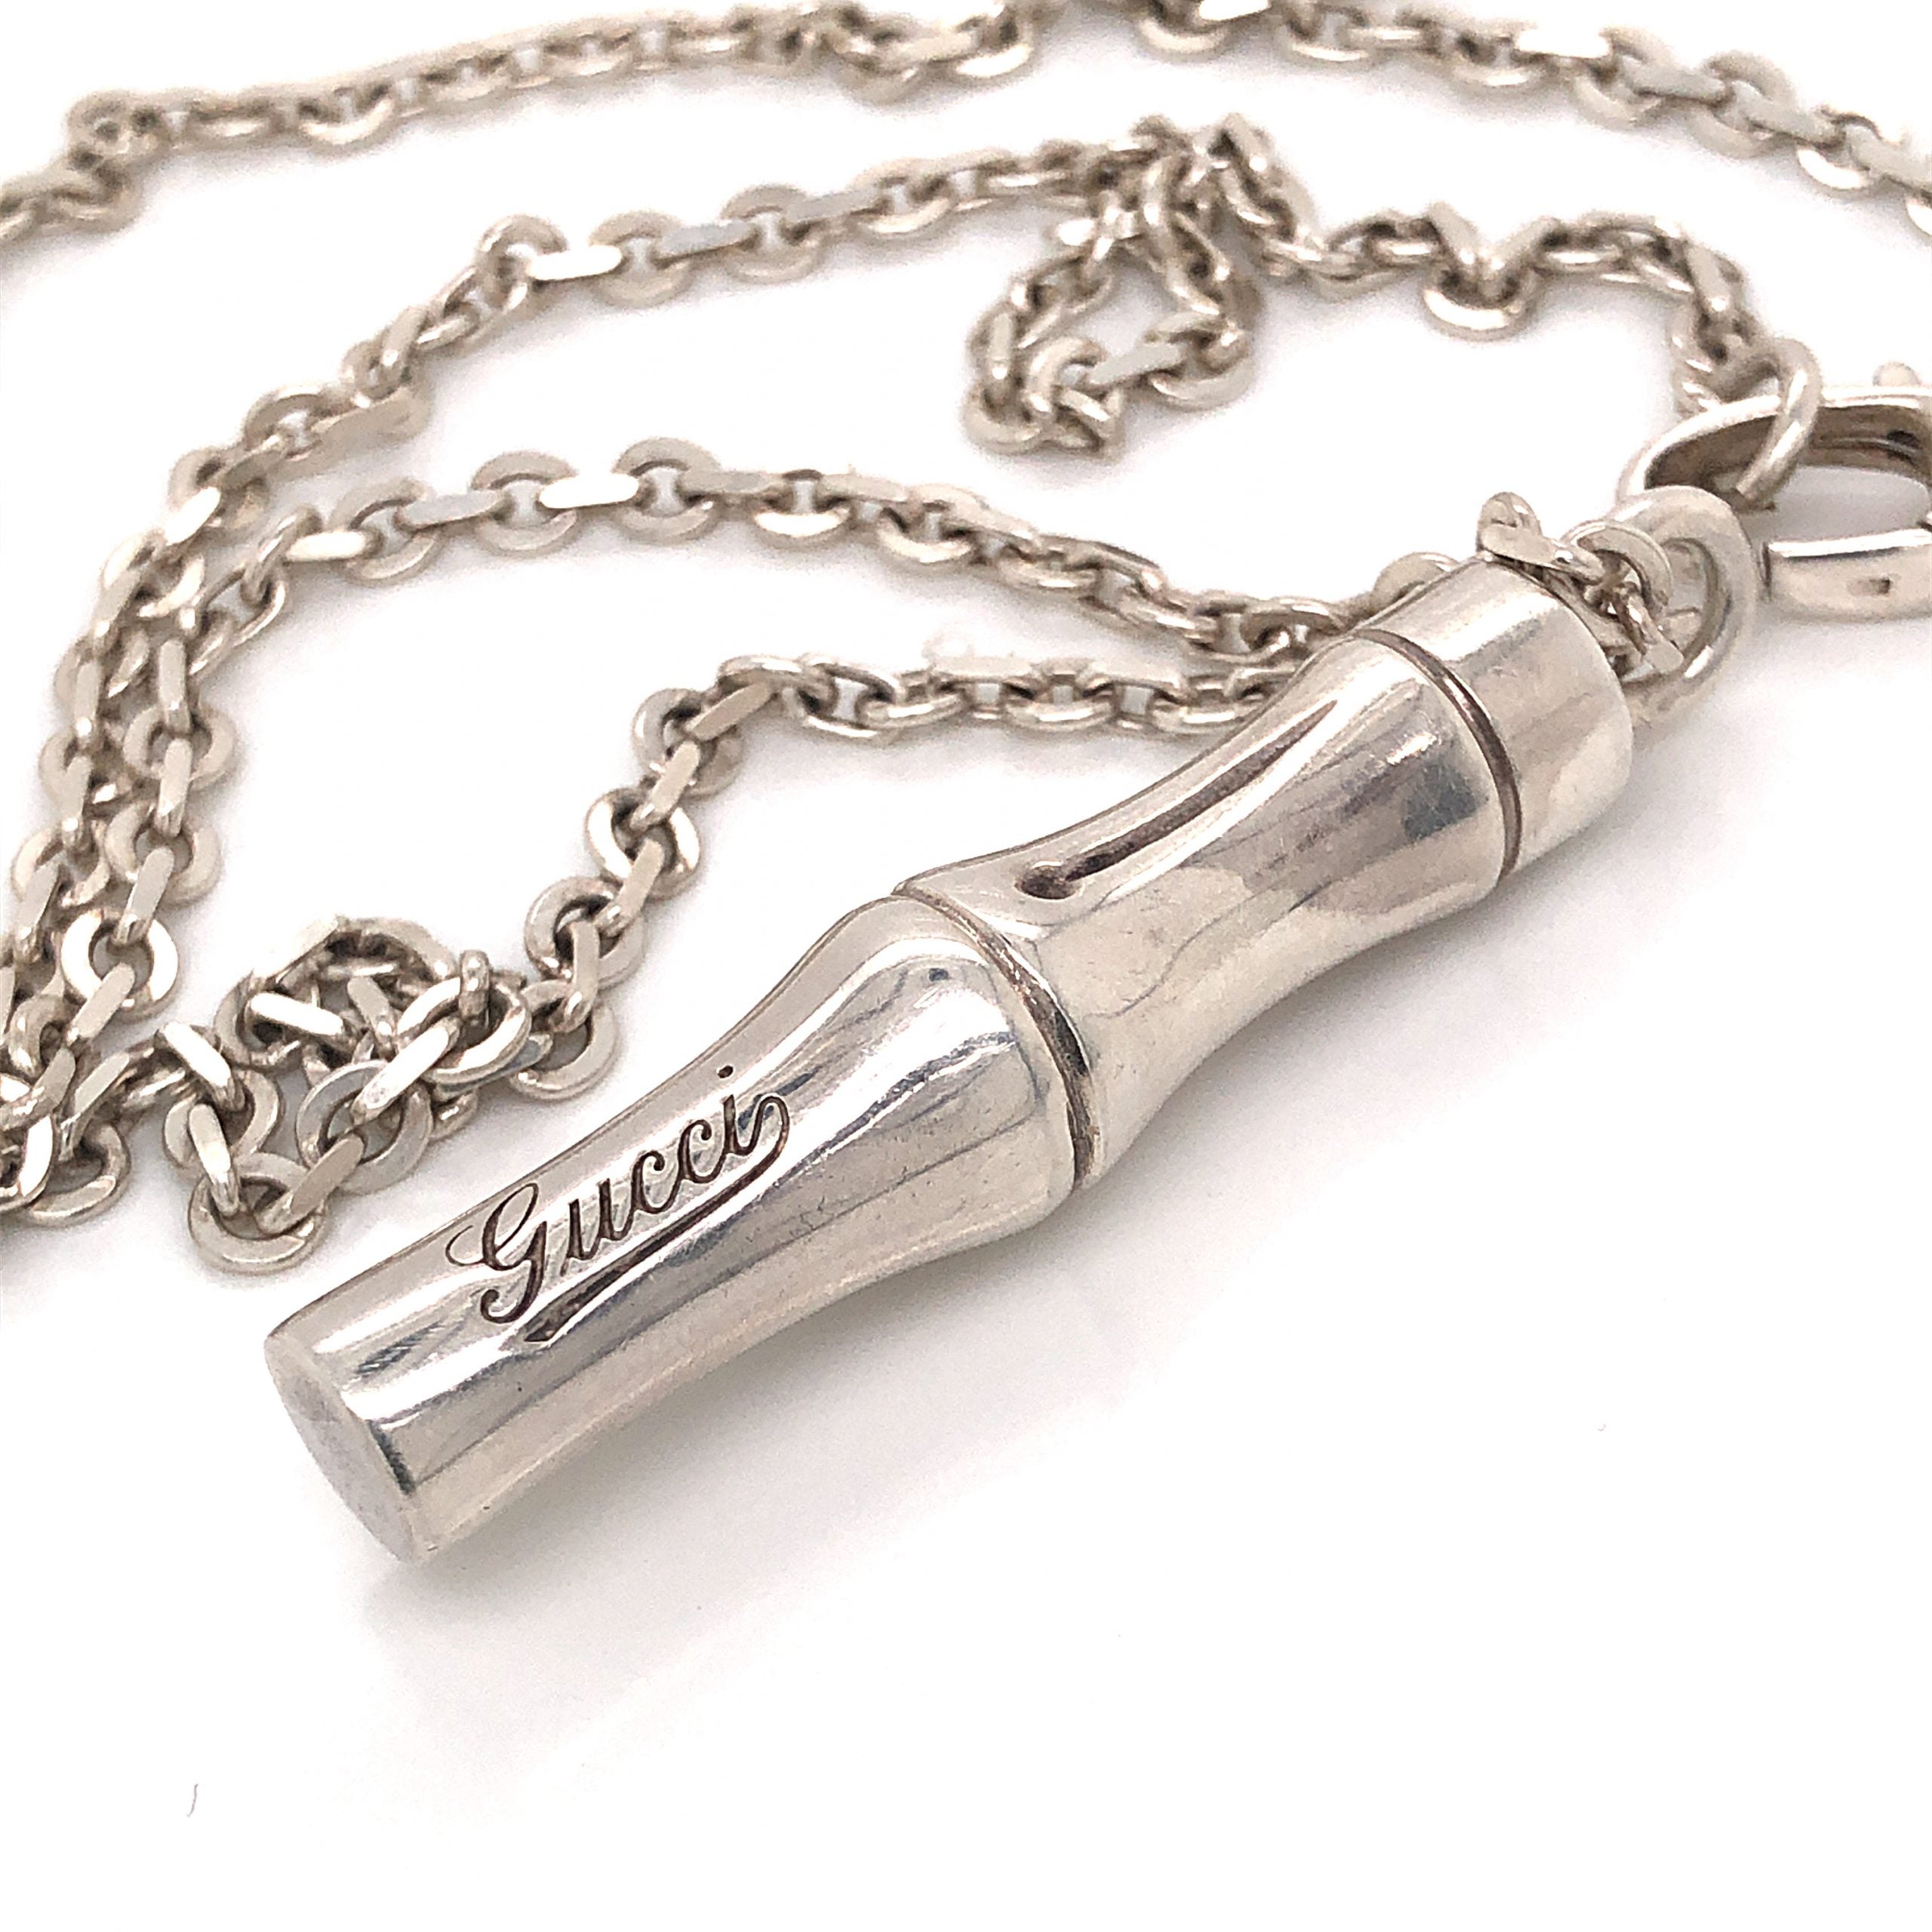 Gucci Bamboo Pendant Necklace in Sterling Silver - Filigree Jewelers